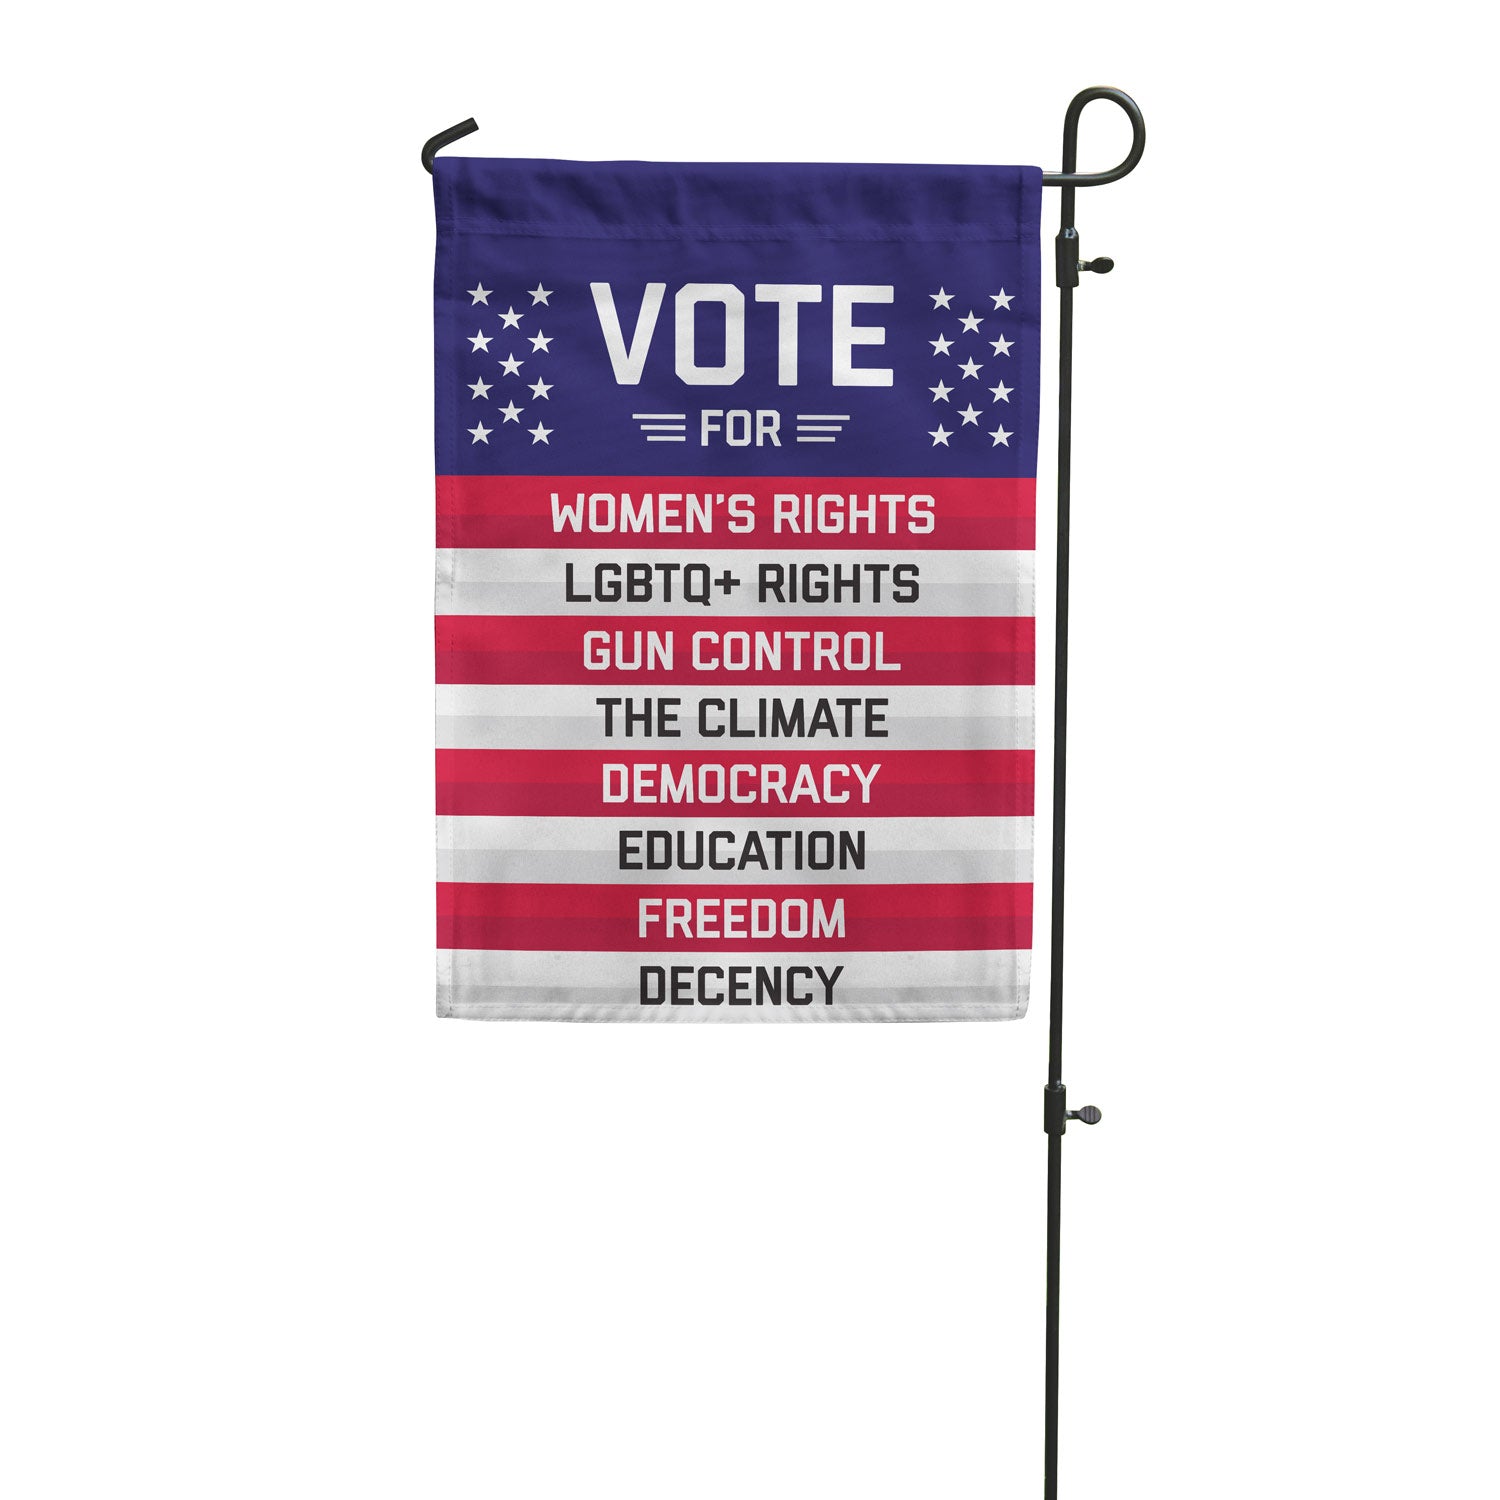 VOTE FOR - Women's Rights, LGBTQ+ Rights, Gun Control, The Climate, Democracy, Education, Freedom, Decency - Garden Flag by Flags For Good